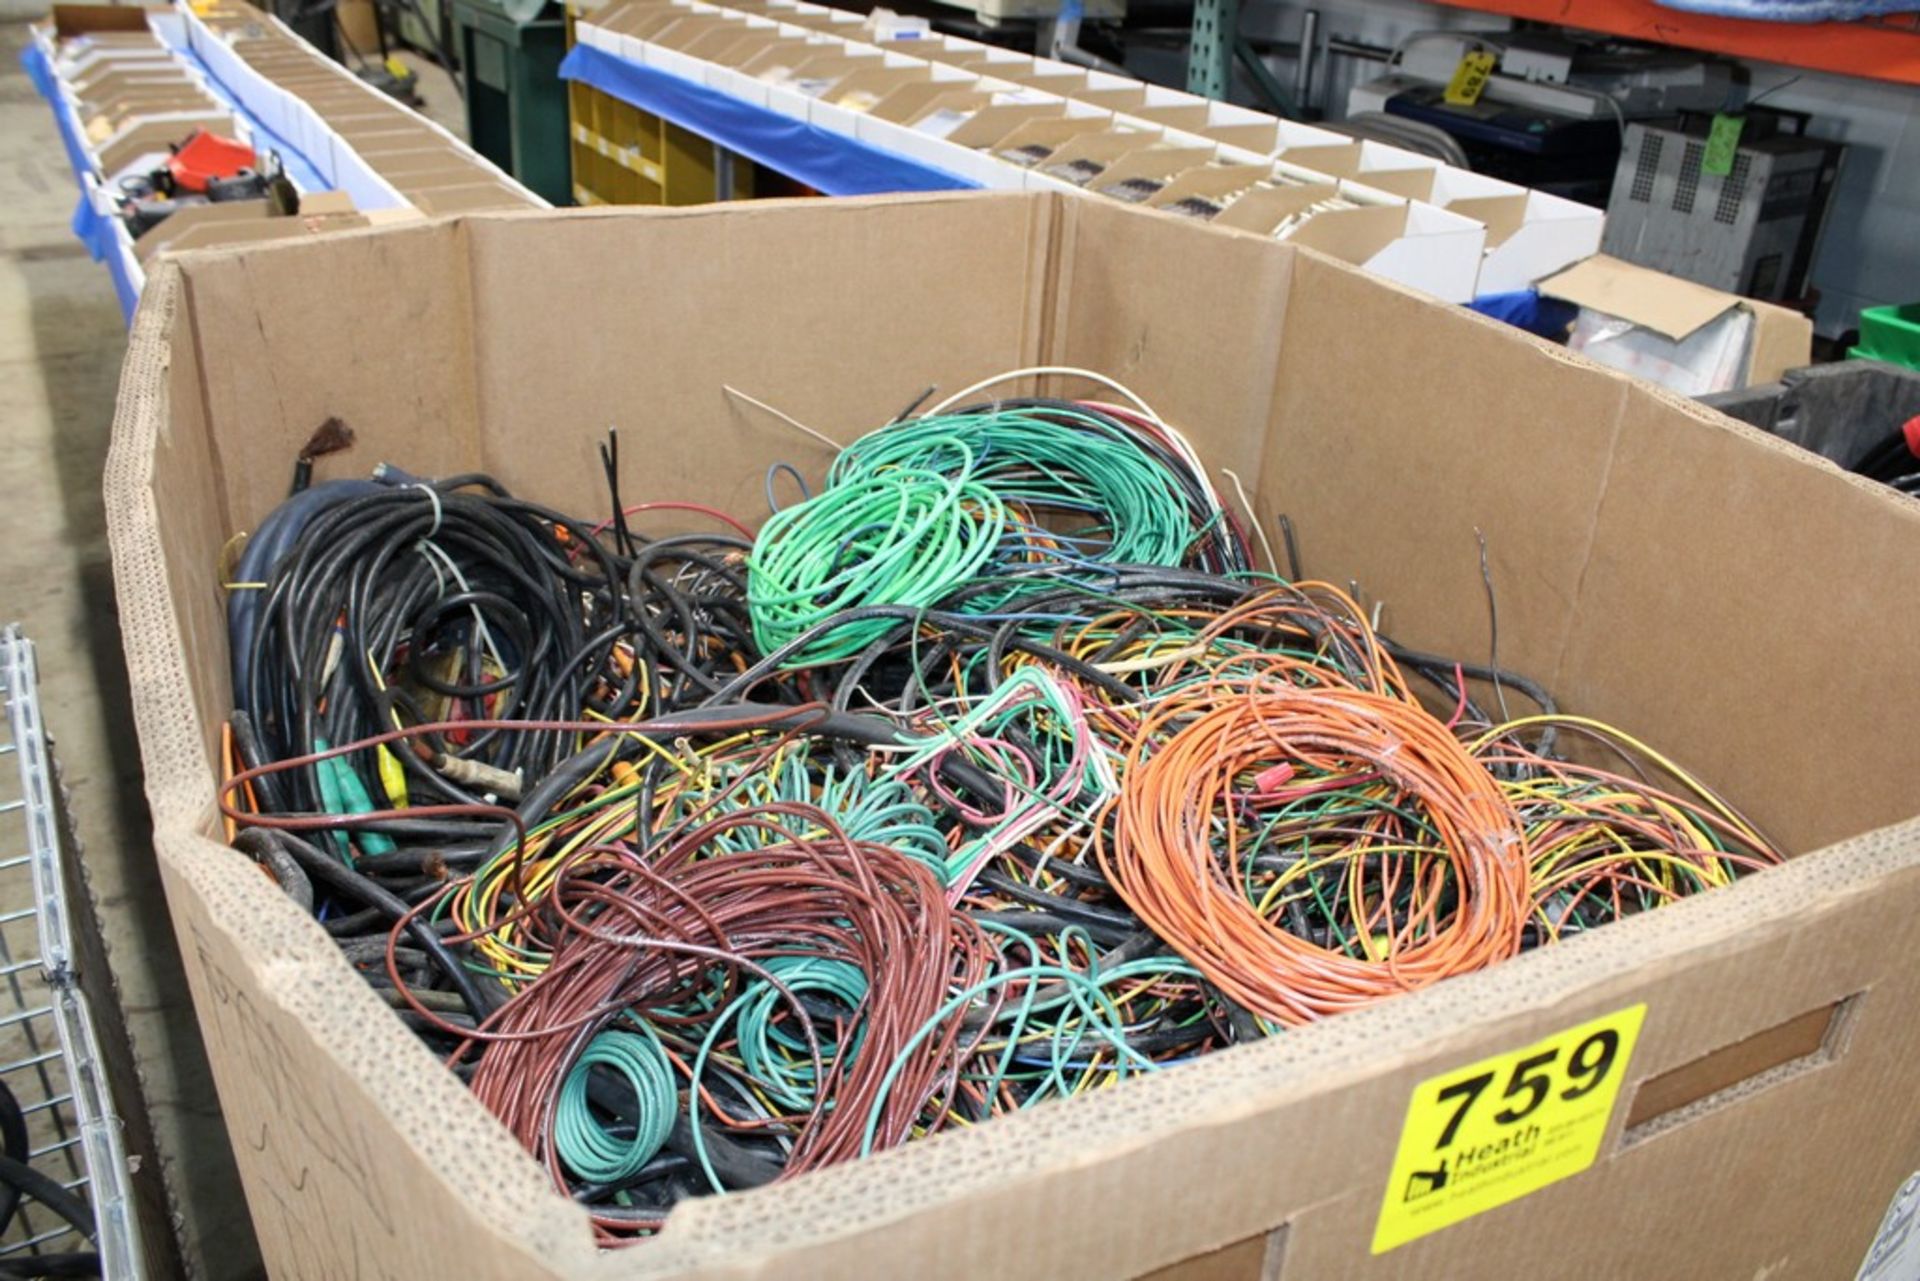 LARGE QUANTITY OF SCRAP WIRE IN CARDBOARD GAYLORD